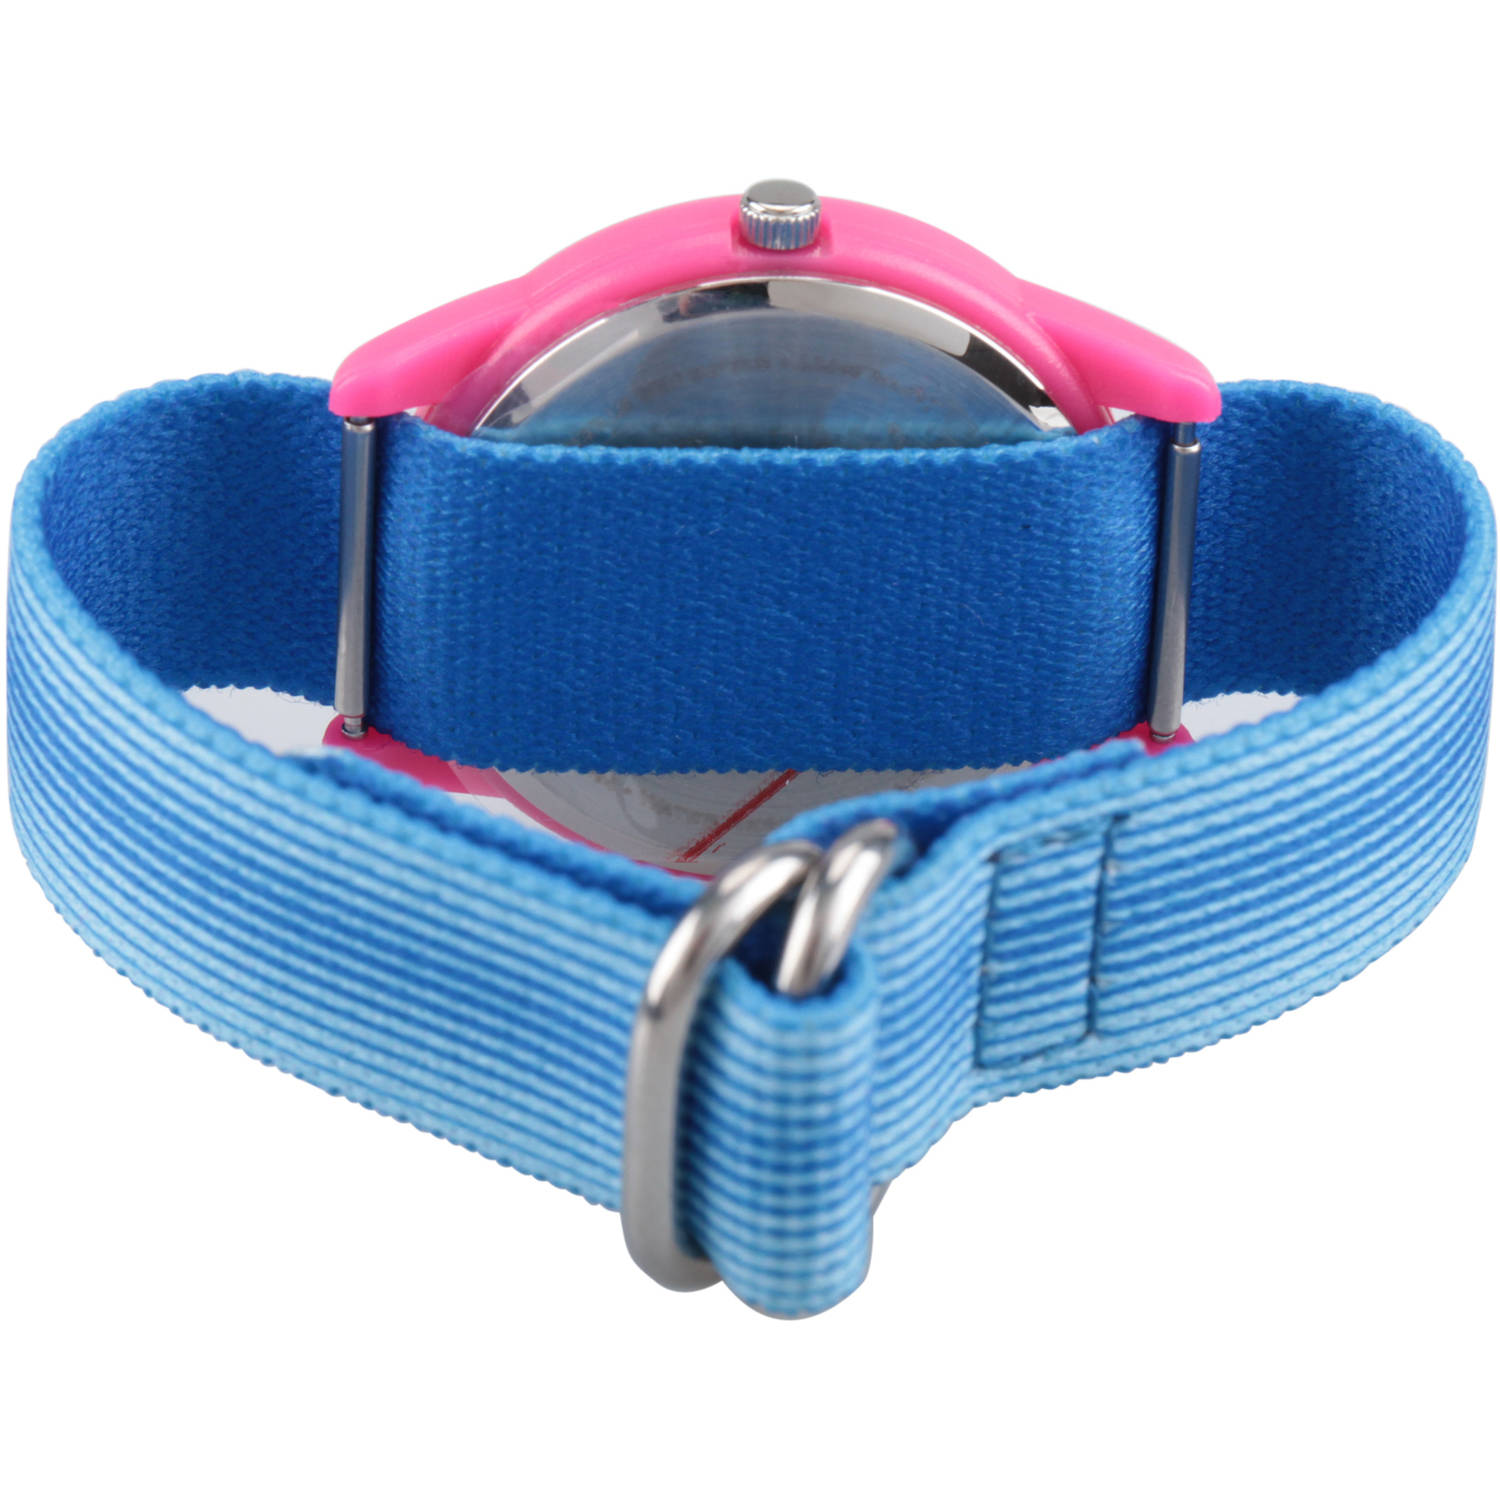 Frozen Elsa and Anna Girls' Pink Plastic Time Teacher Watch, Blue Stripe Stretchy Nylon Strap - image 2 of 6